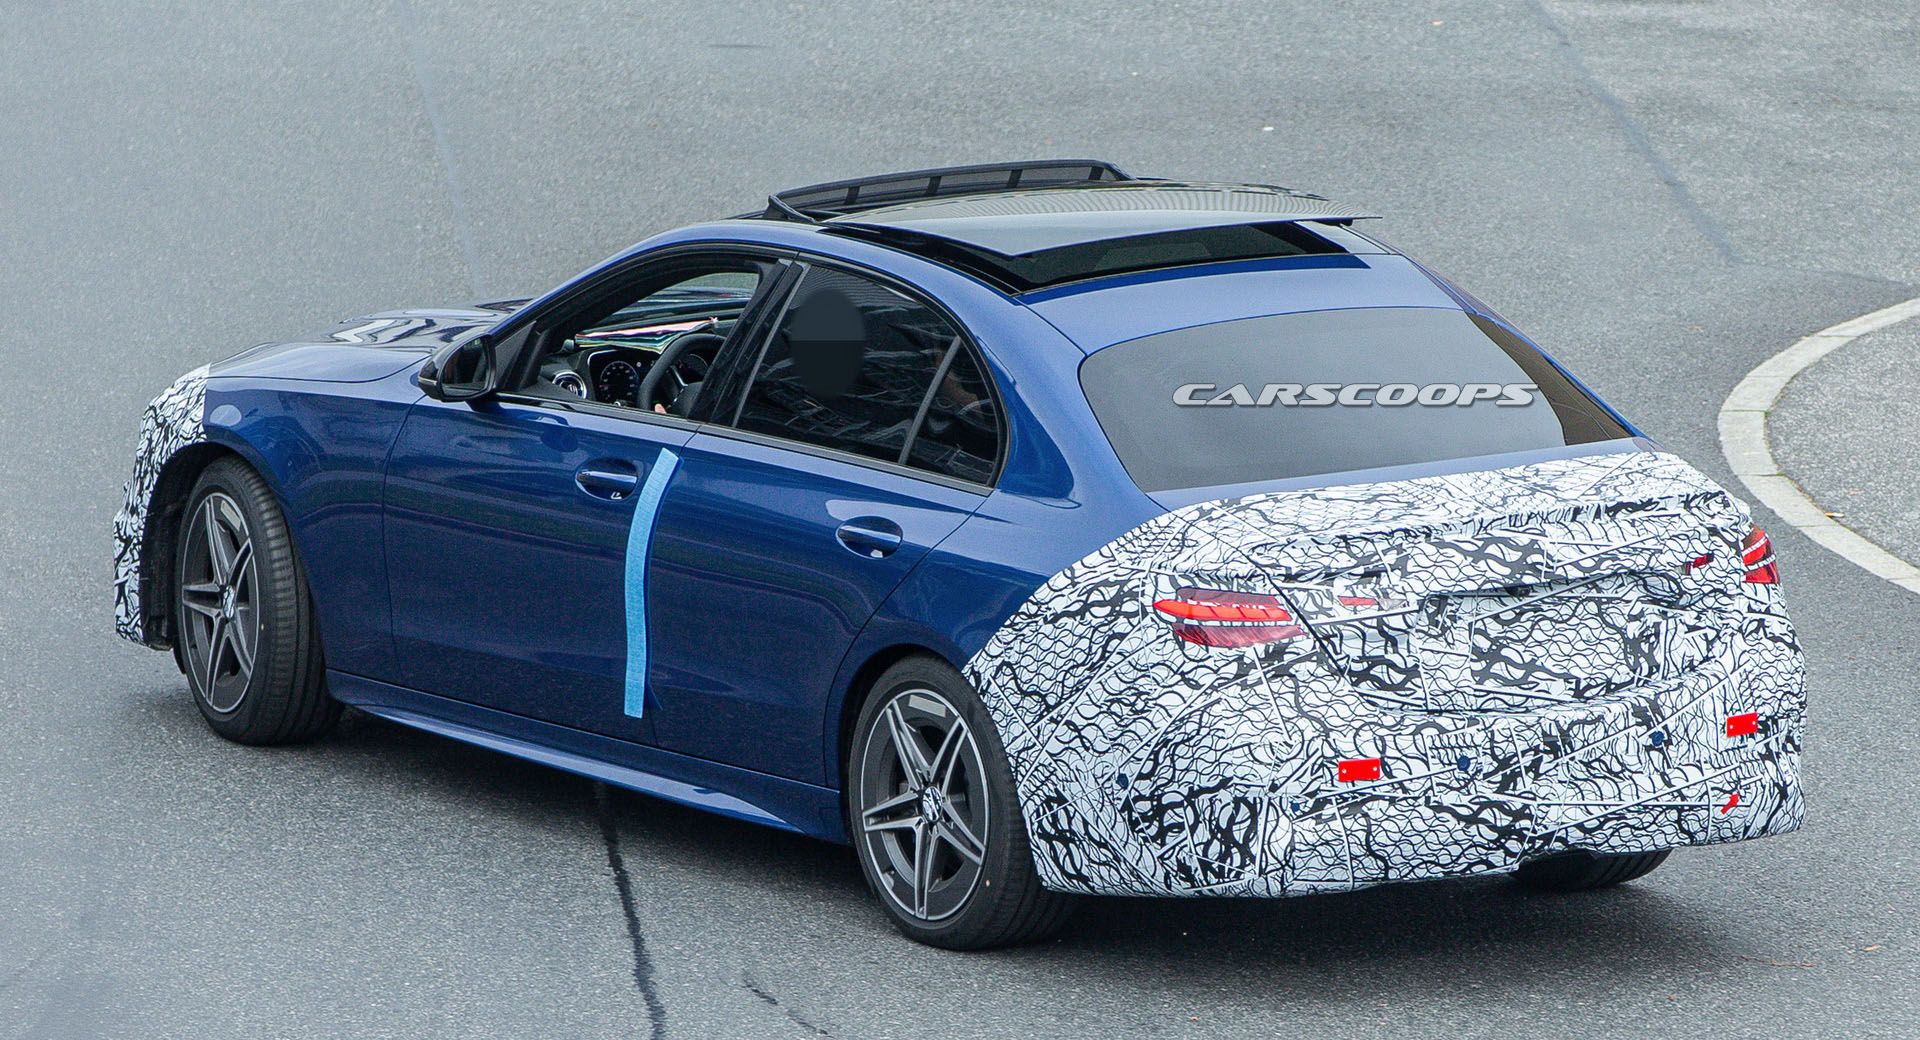 22 Mercedes Benz C Class Drops Most Of Its Camouflage To Reveal Elegant New Design Carscoops